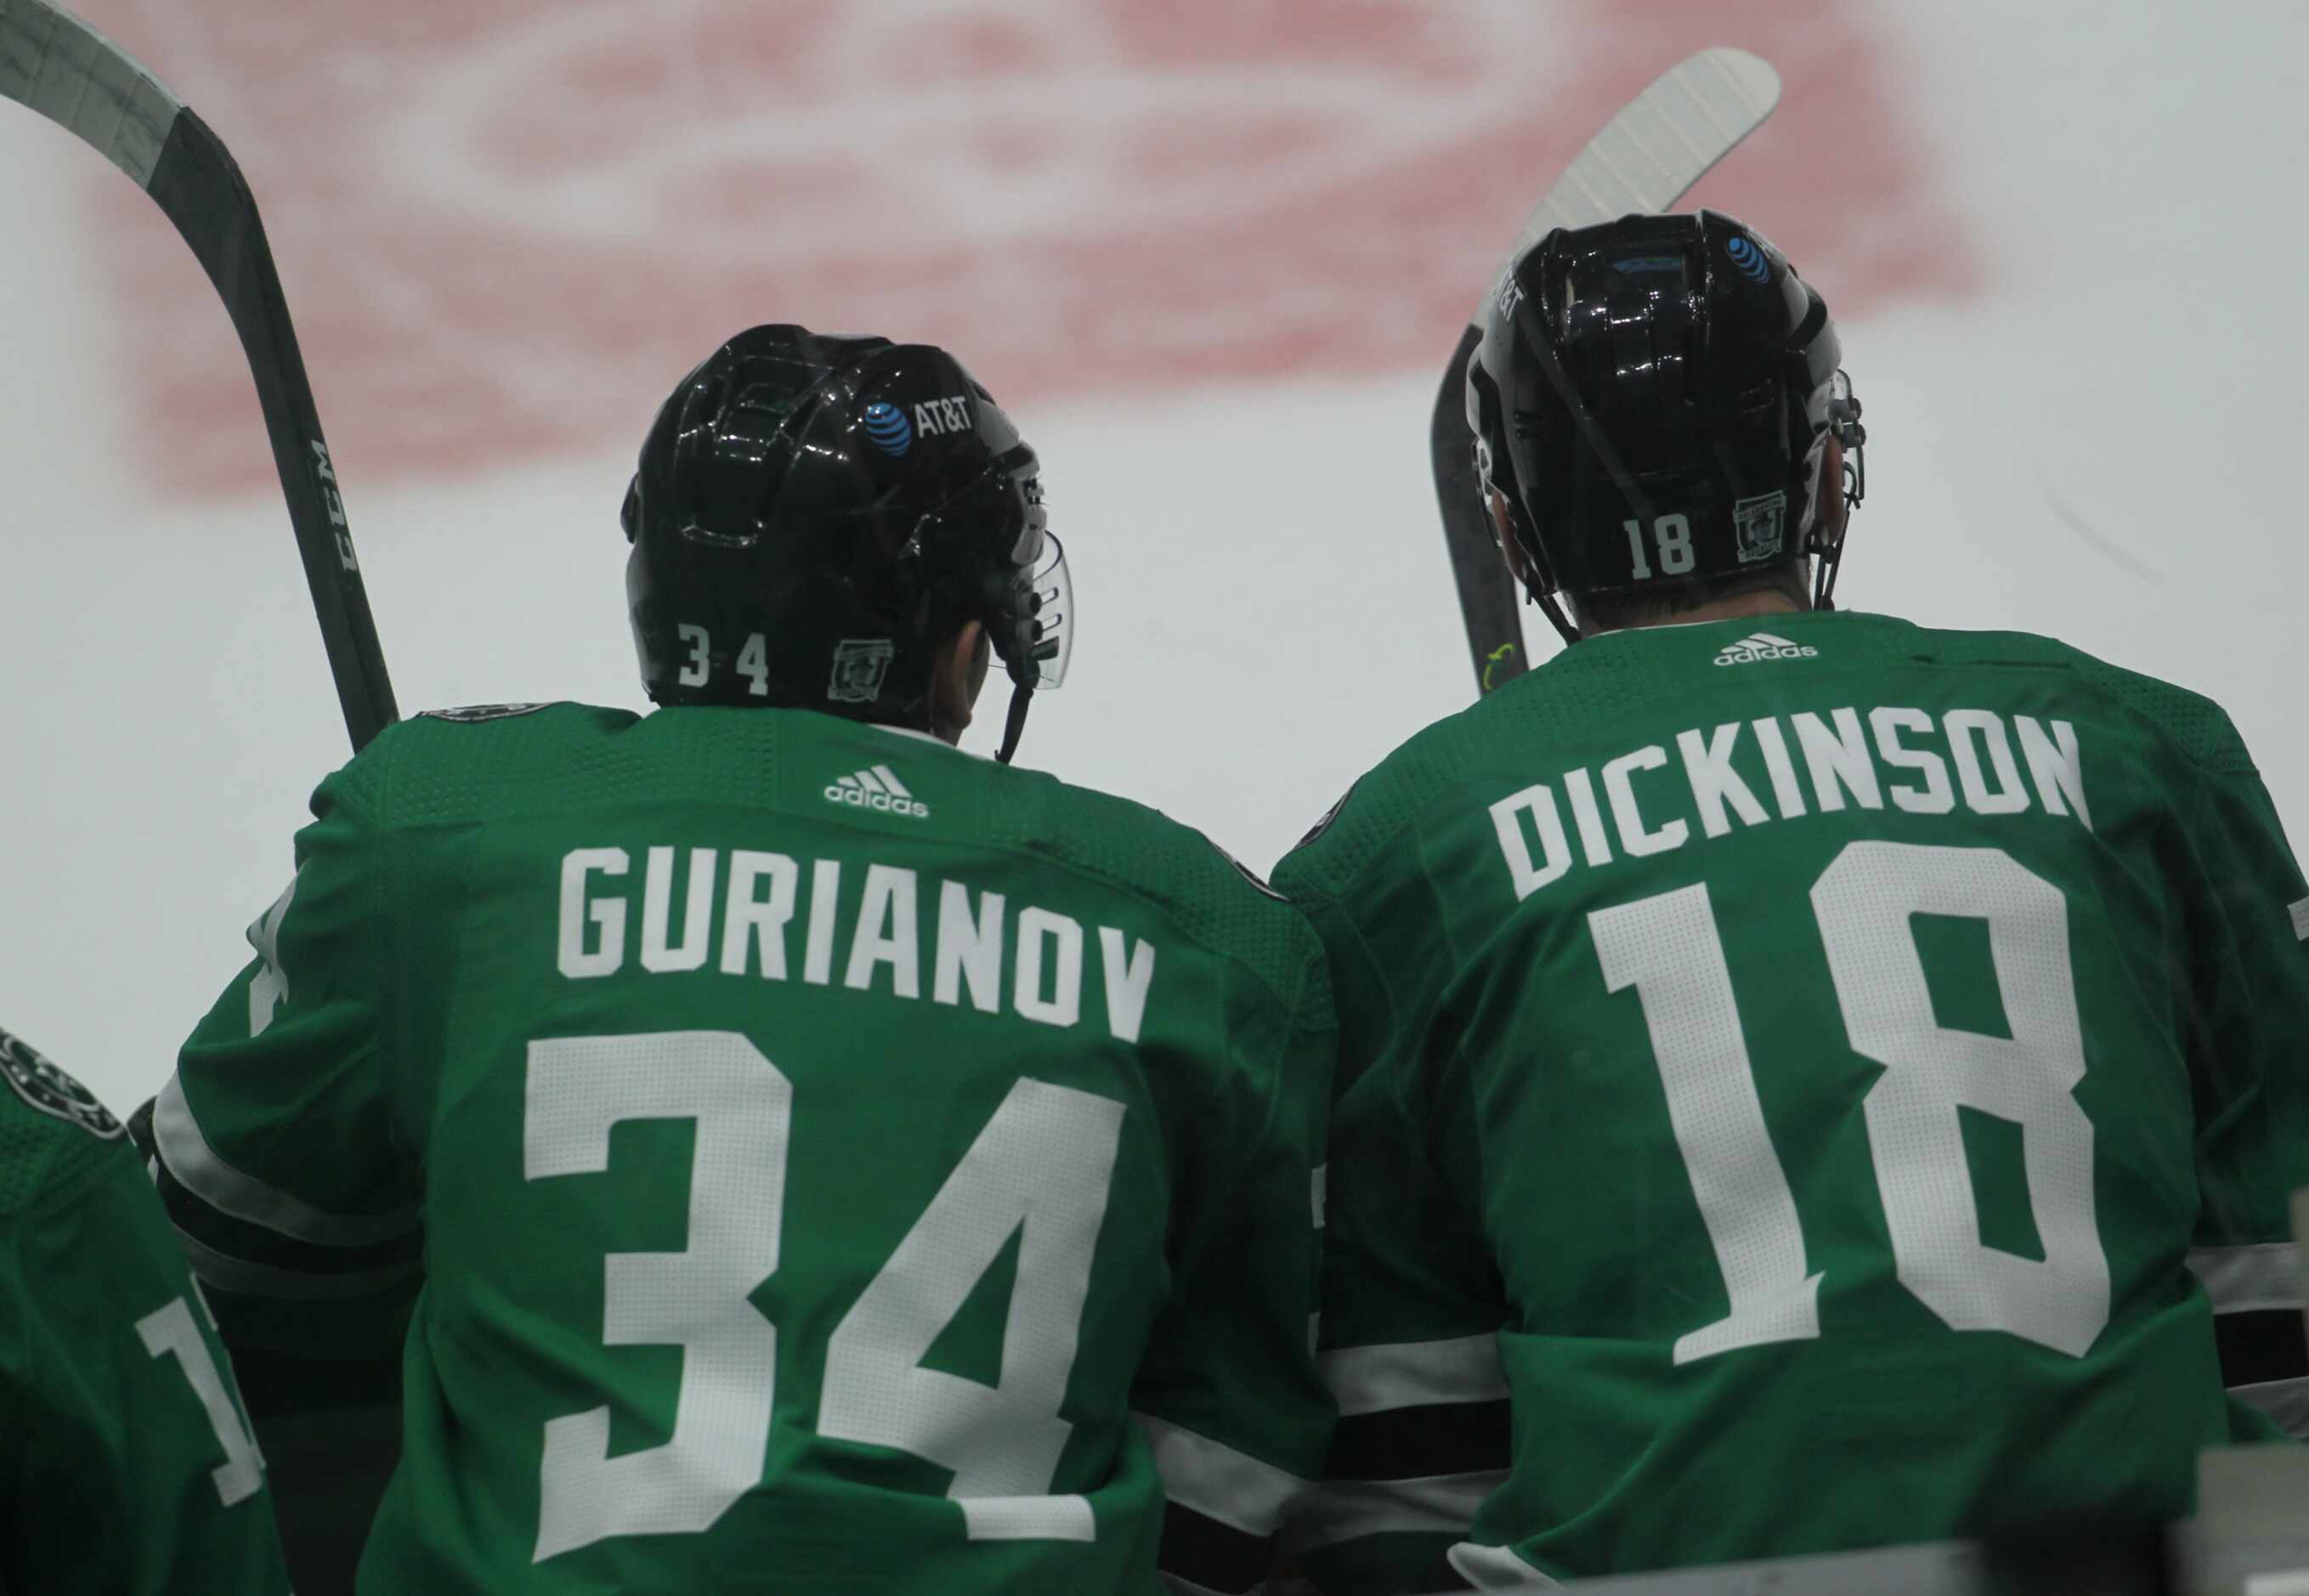 Dallas Stars forwards Denis Gurianov (34) and Jason Dickinson (18) take a breather on the...